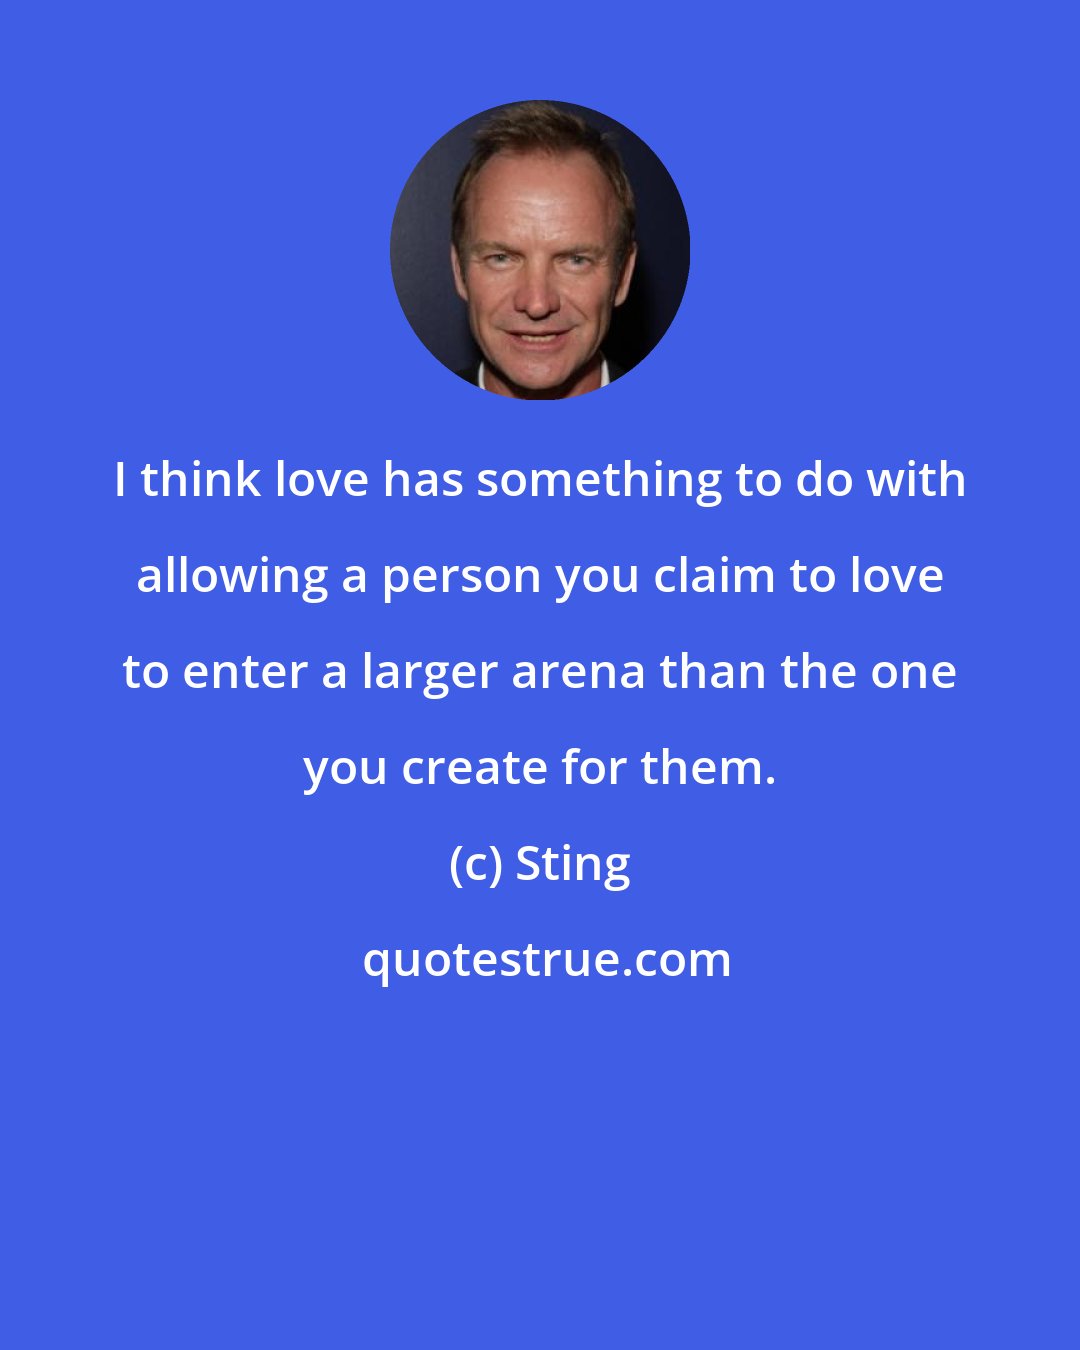 Sting: I think love has something to do with allowing a person you claim to love to enter a larger arena than the one you create for them.